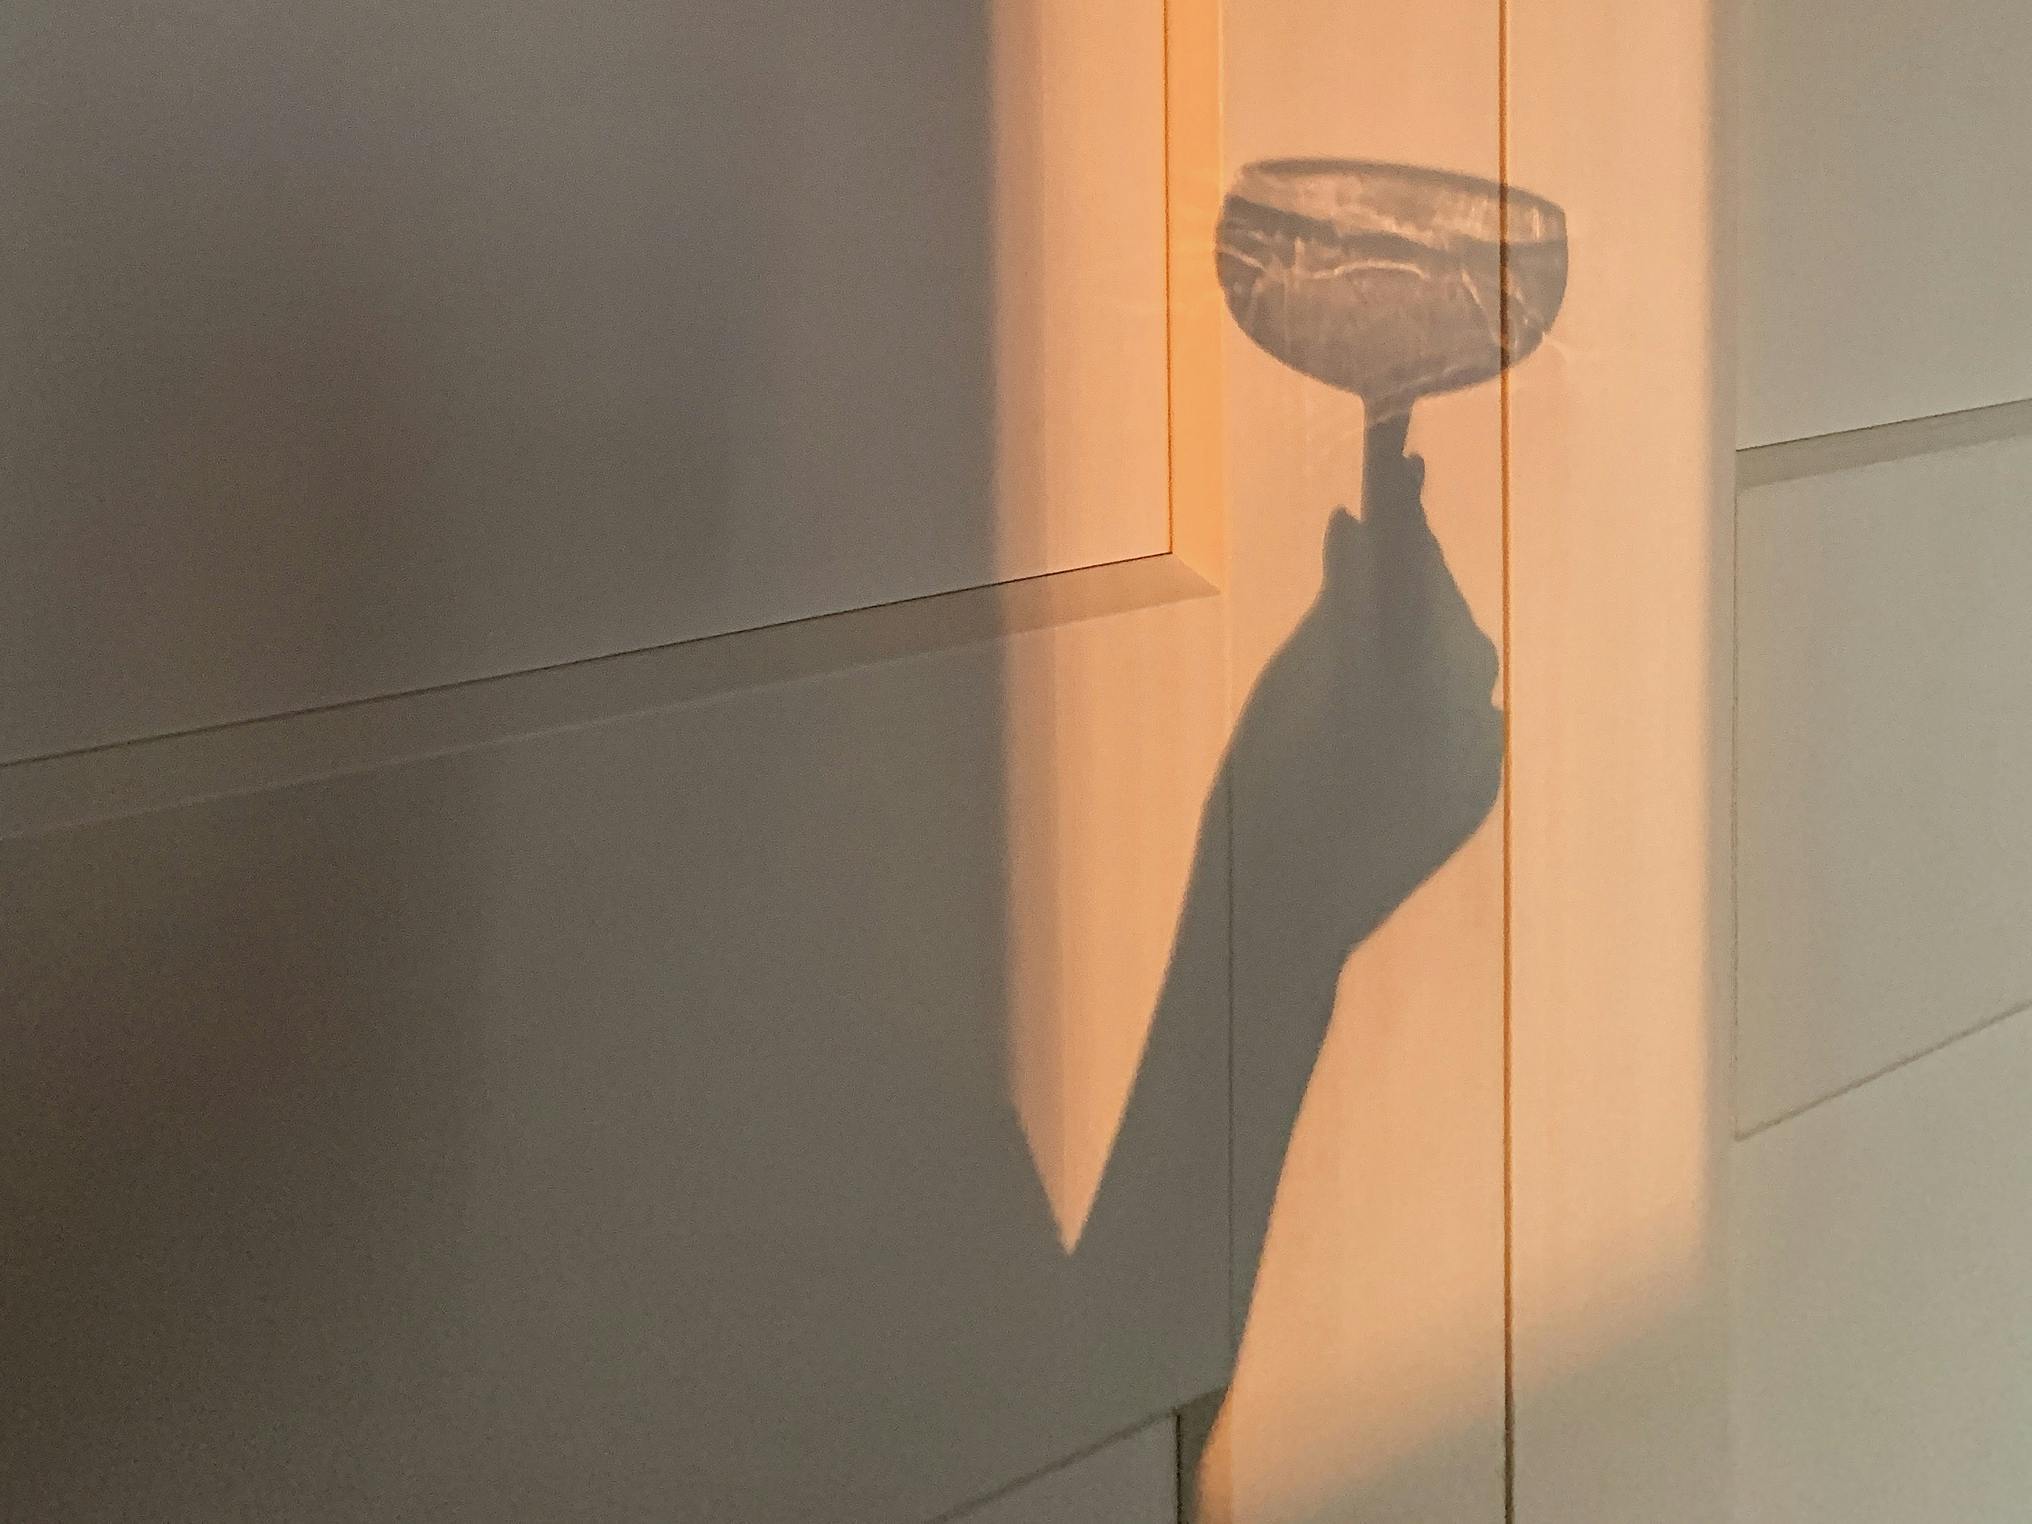 Casted shadow of someone holding a glass.